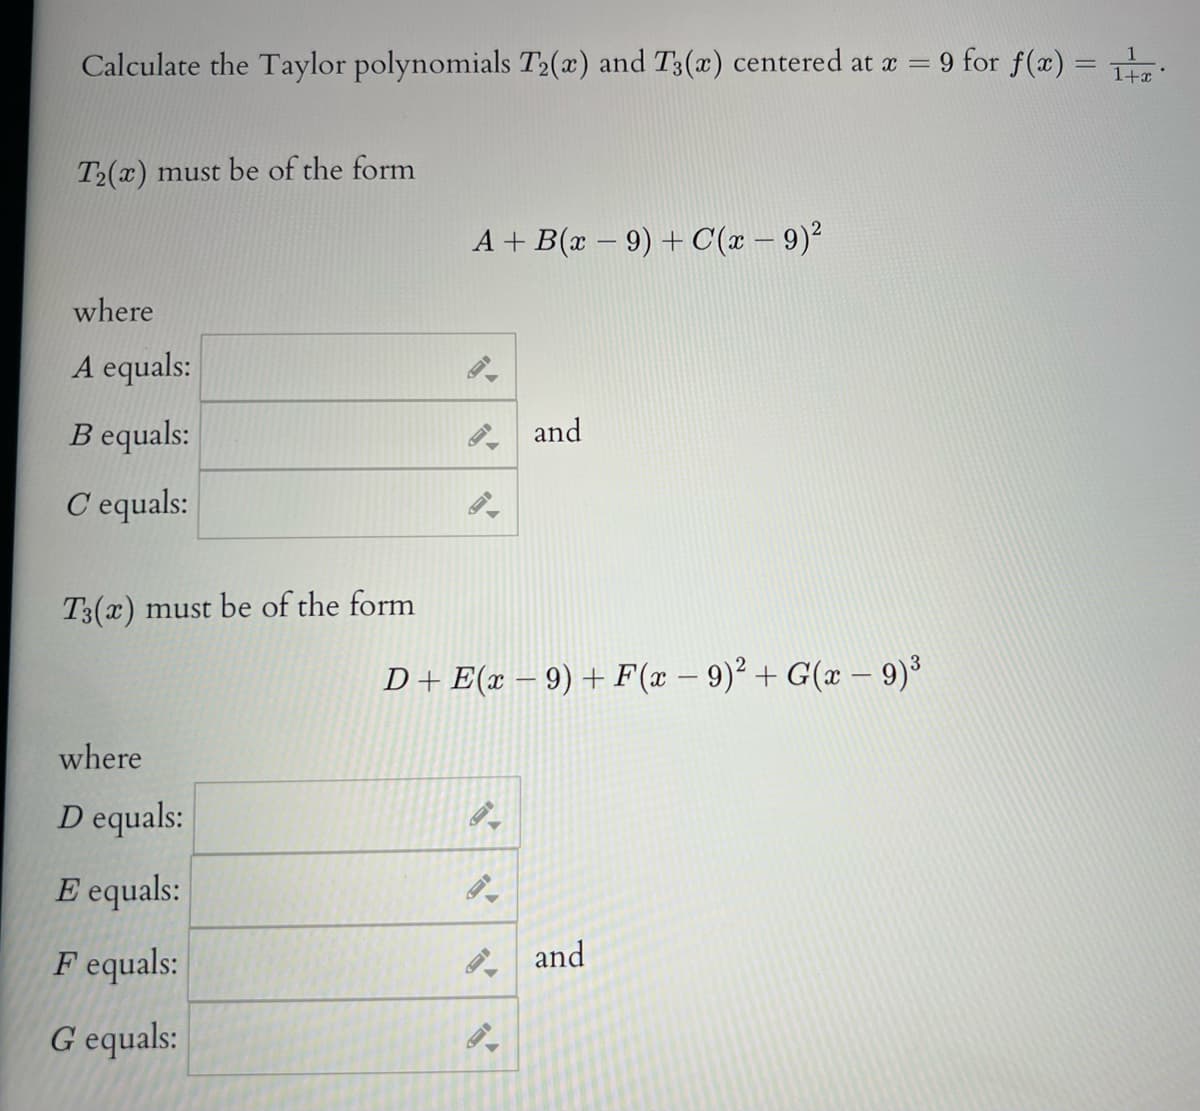 Calculate the Taylor polynomials T2(x) and T3(x) centered at a = 9 for f(x) = T:
T2(x) must be of the form
A + B(x – 9) + C(x – 9)²
where
A equals:
B equals:
and
C equals:
T3(x) must be of the form
D+ E(x – 9) + F(x – 9)2 + G(x - 9)³
where
D equals:
E equals:
F equals:
P and
G equals:
